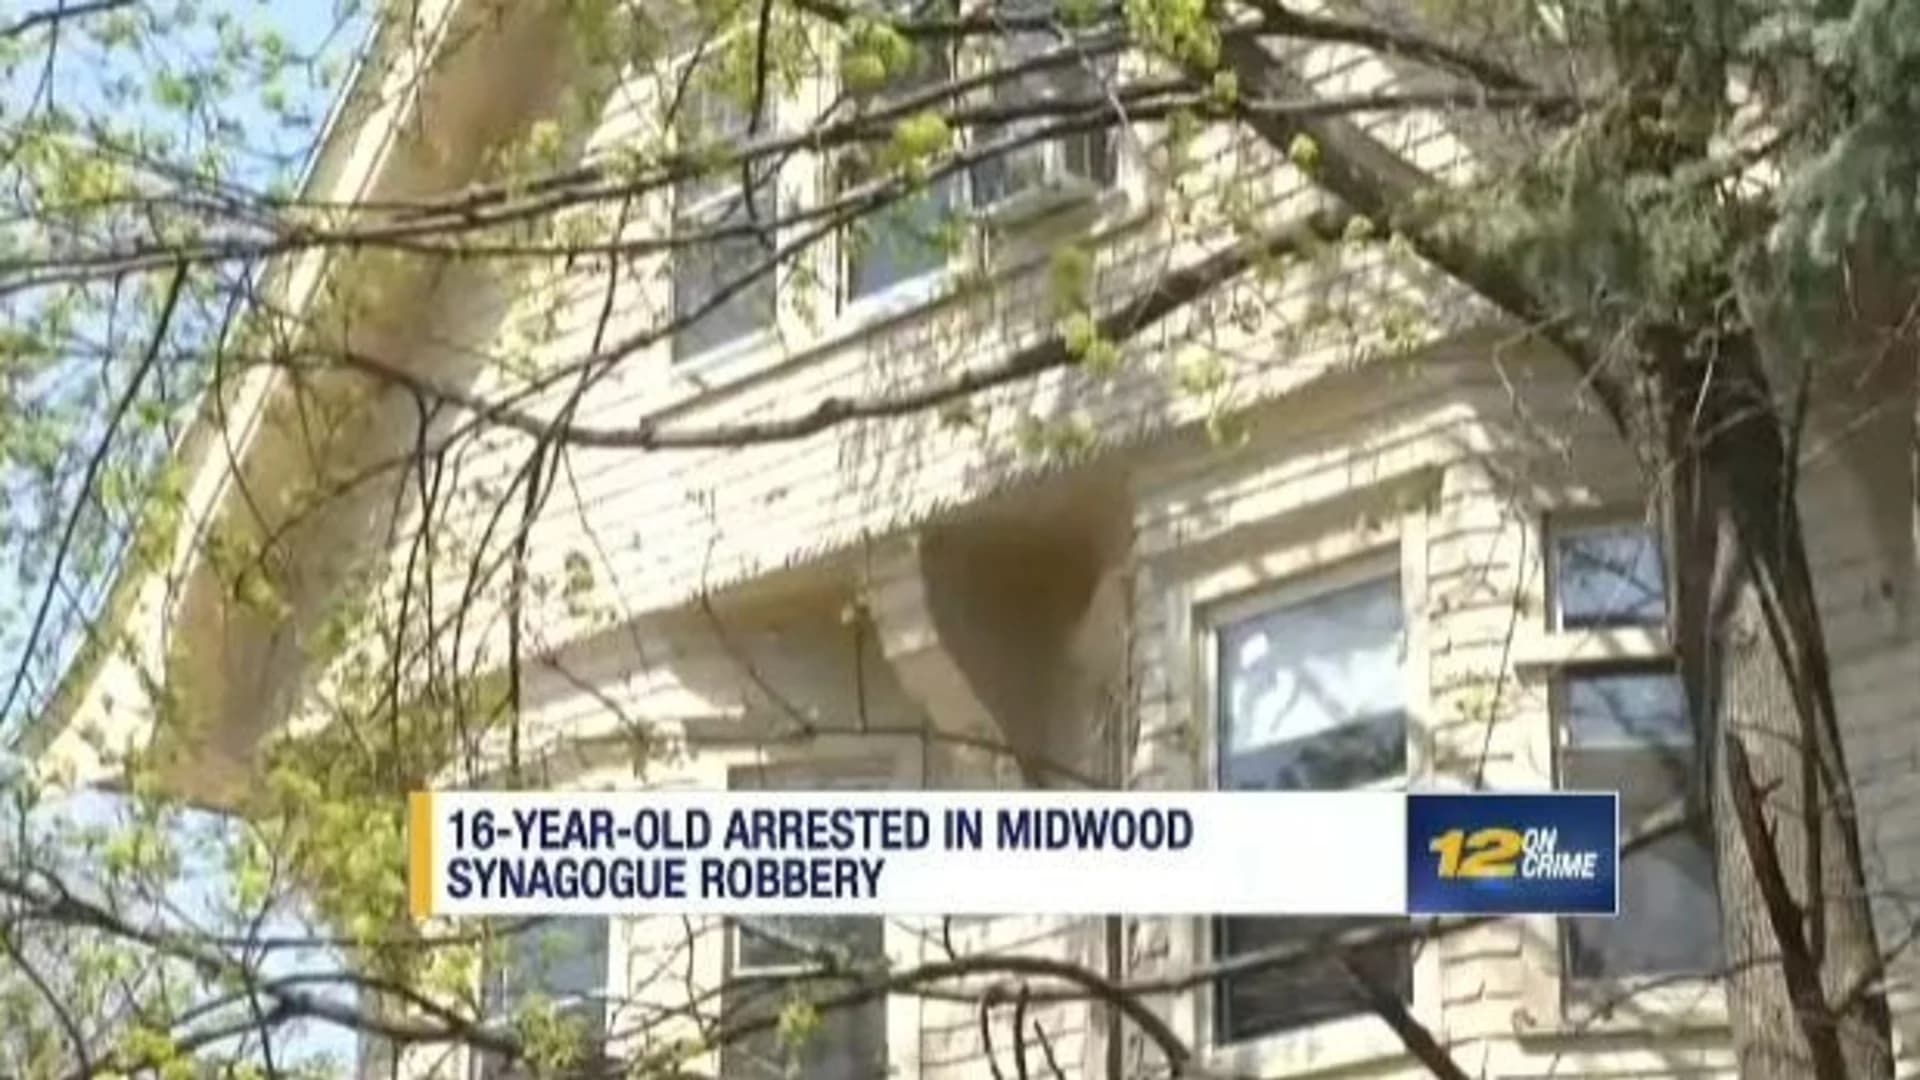 Teen faces charges in synagogue robbery